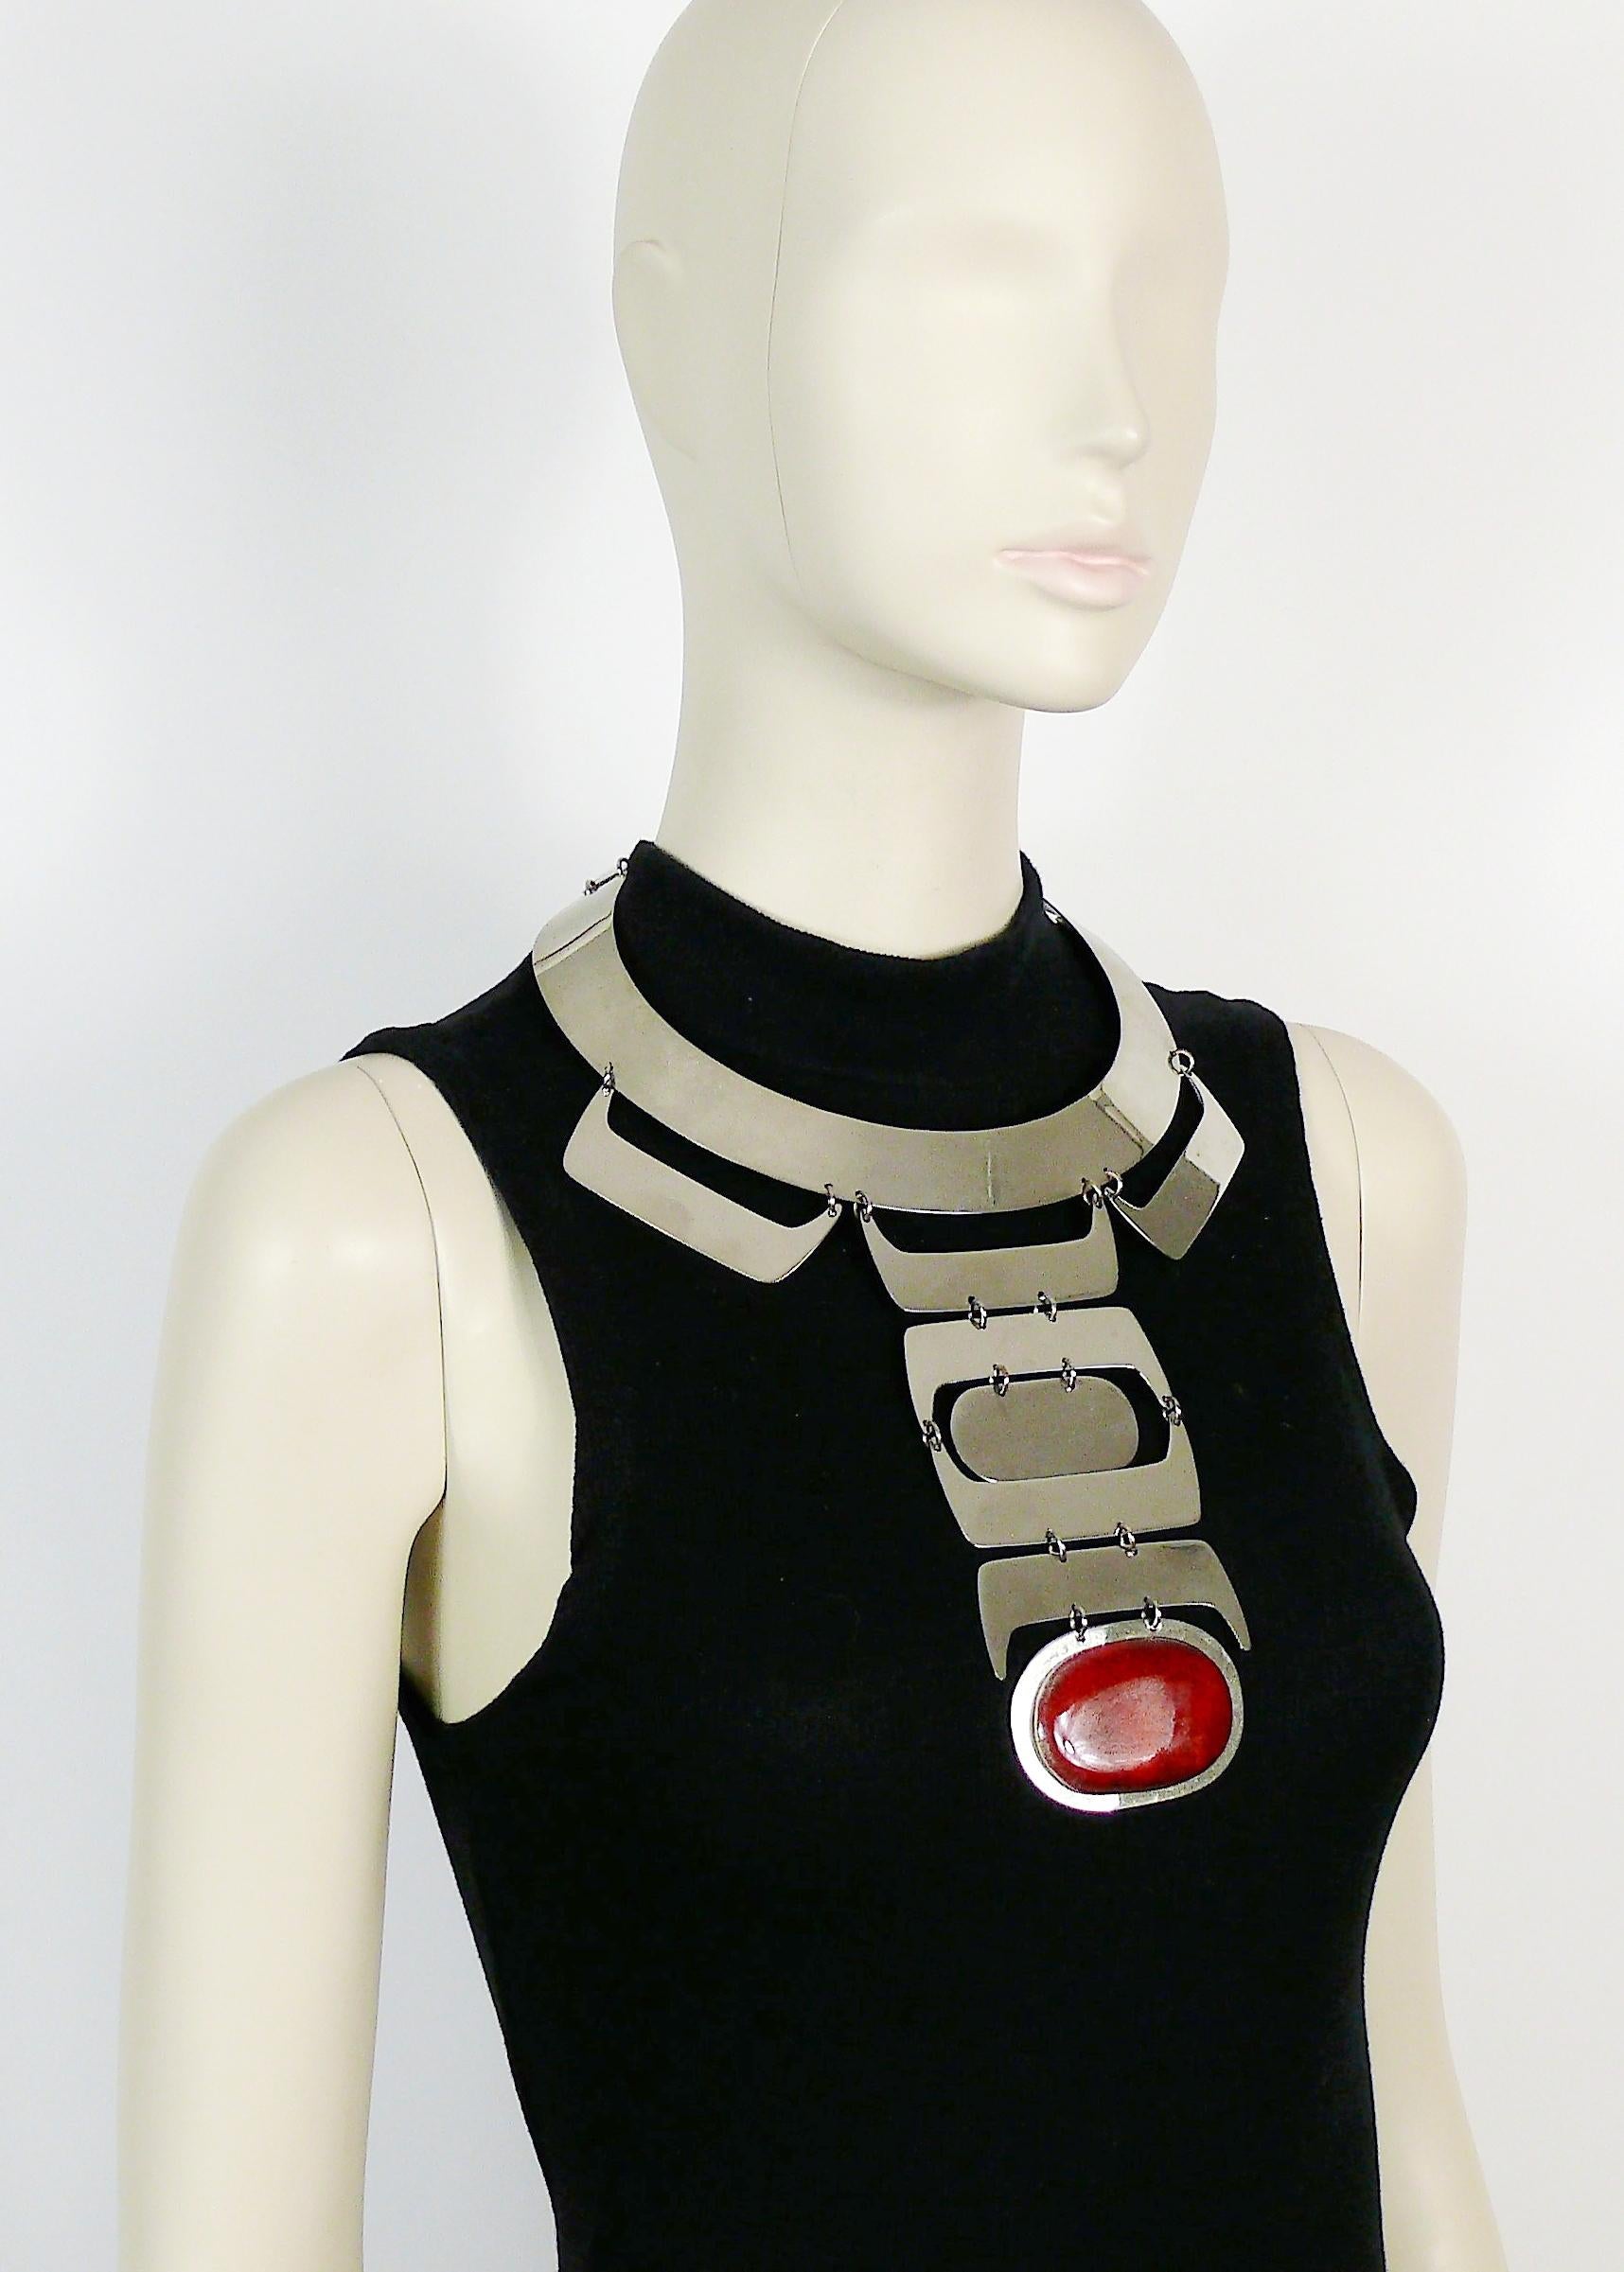 Futuristic Space Age vintage silver toned plastron choker necklace featuring a large oval red ceramic cabochon pendant.

Hook clasp closure.

Unsigned piece.
Stickers with references - runway piece ? prototype ?

JEWELRY CONDITION CHART
- New or